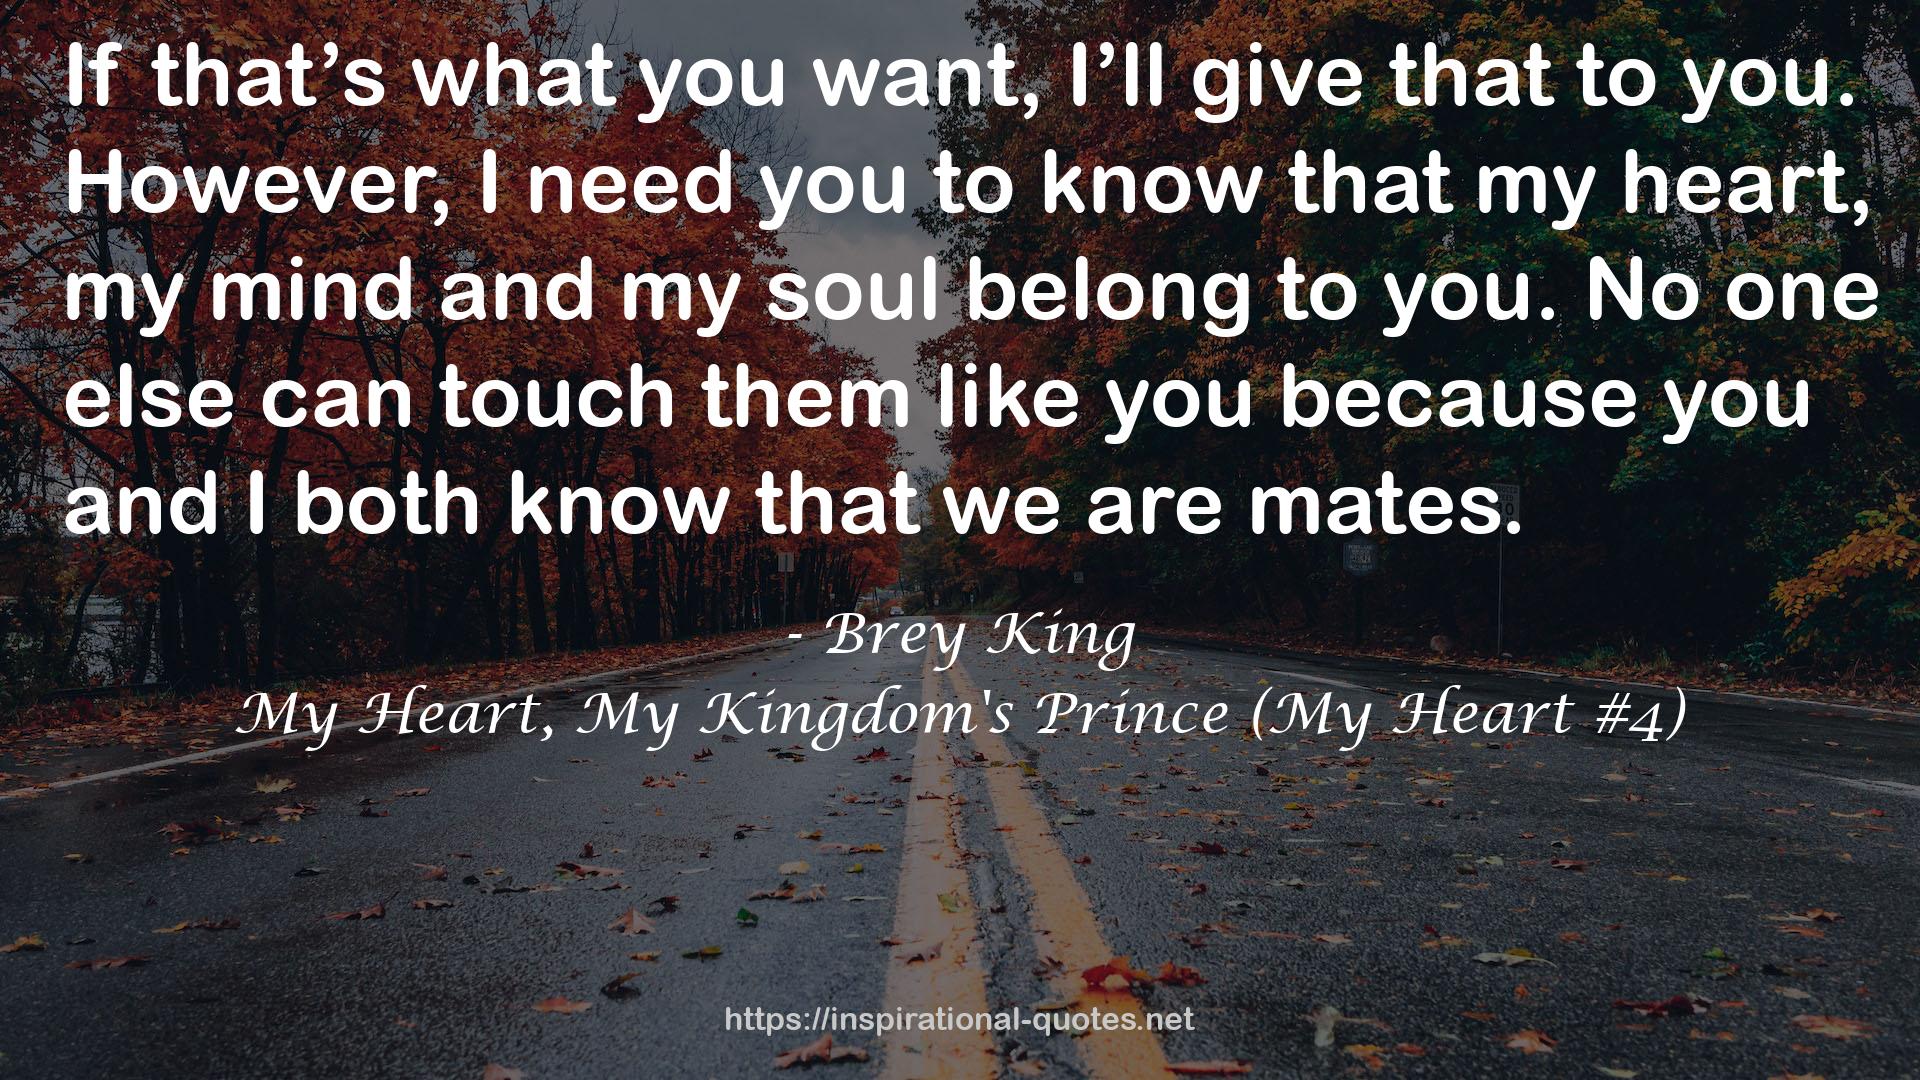 My Heart, My Kingdom's Prince (My Heart #4) QUOTES